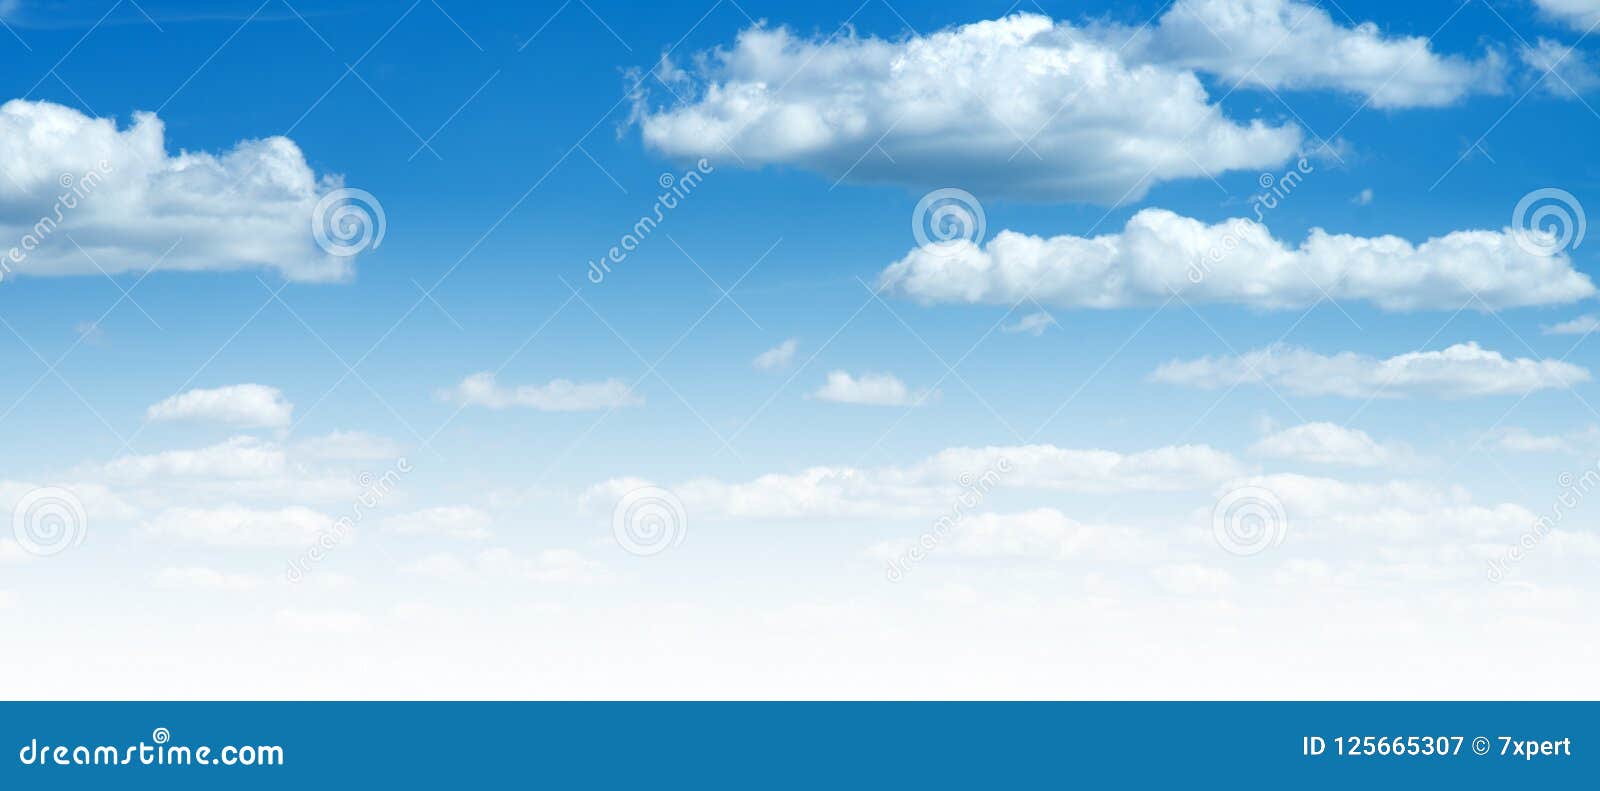 3 963 785 Clouds Photos Free Royalty Free Stock Photos From Dreamstime